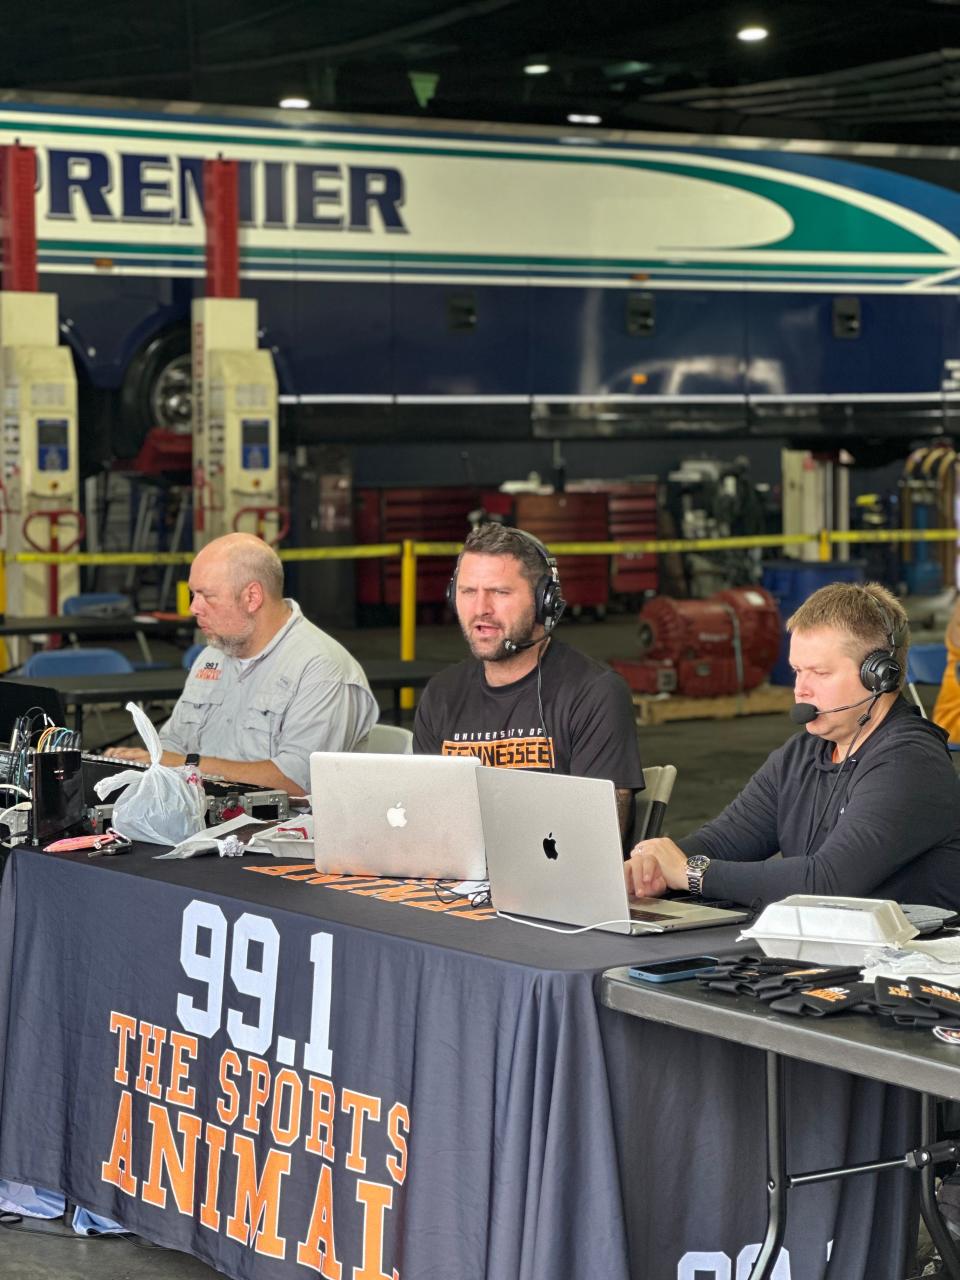 The Erik Ainge Show, hosted by the former UT and NFL quarterback (center), did a live broadcast.